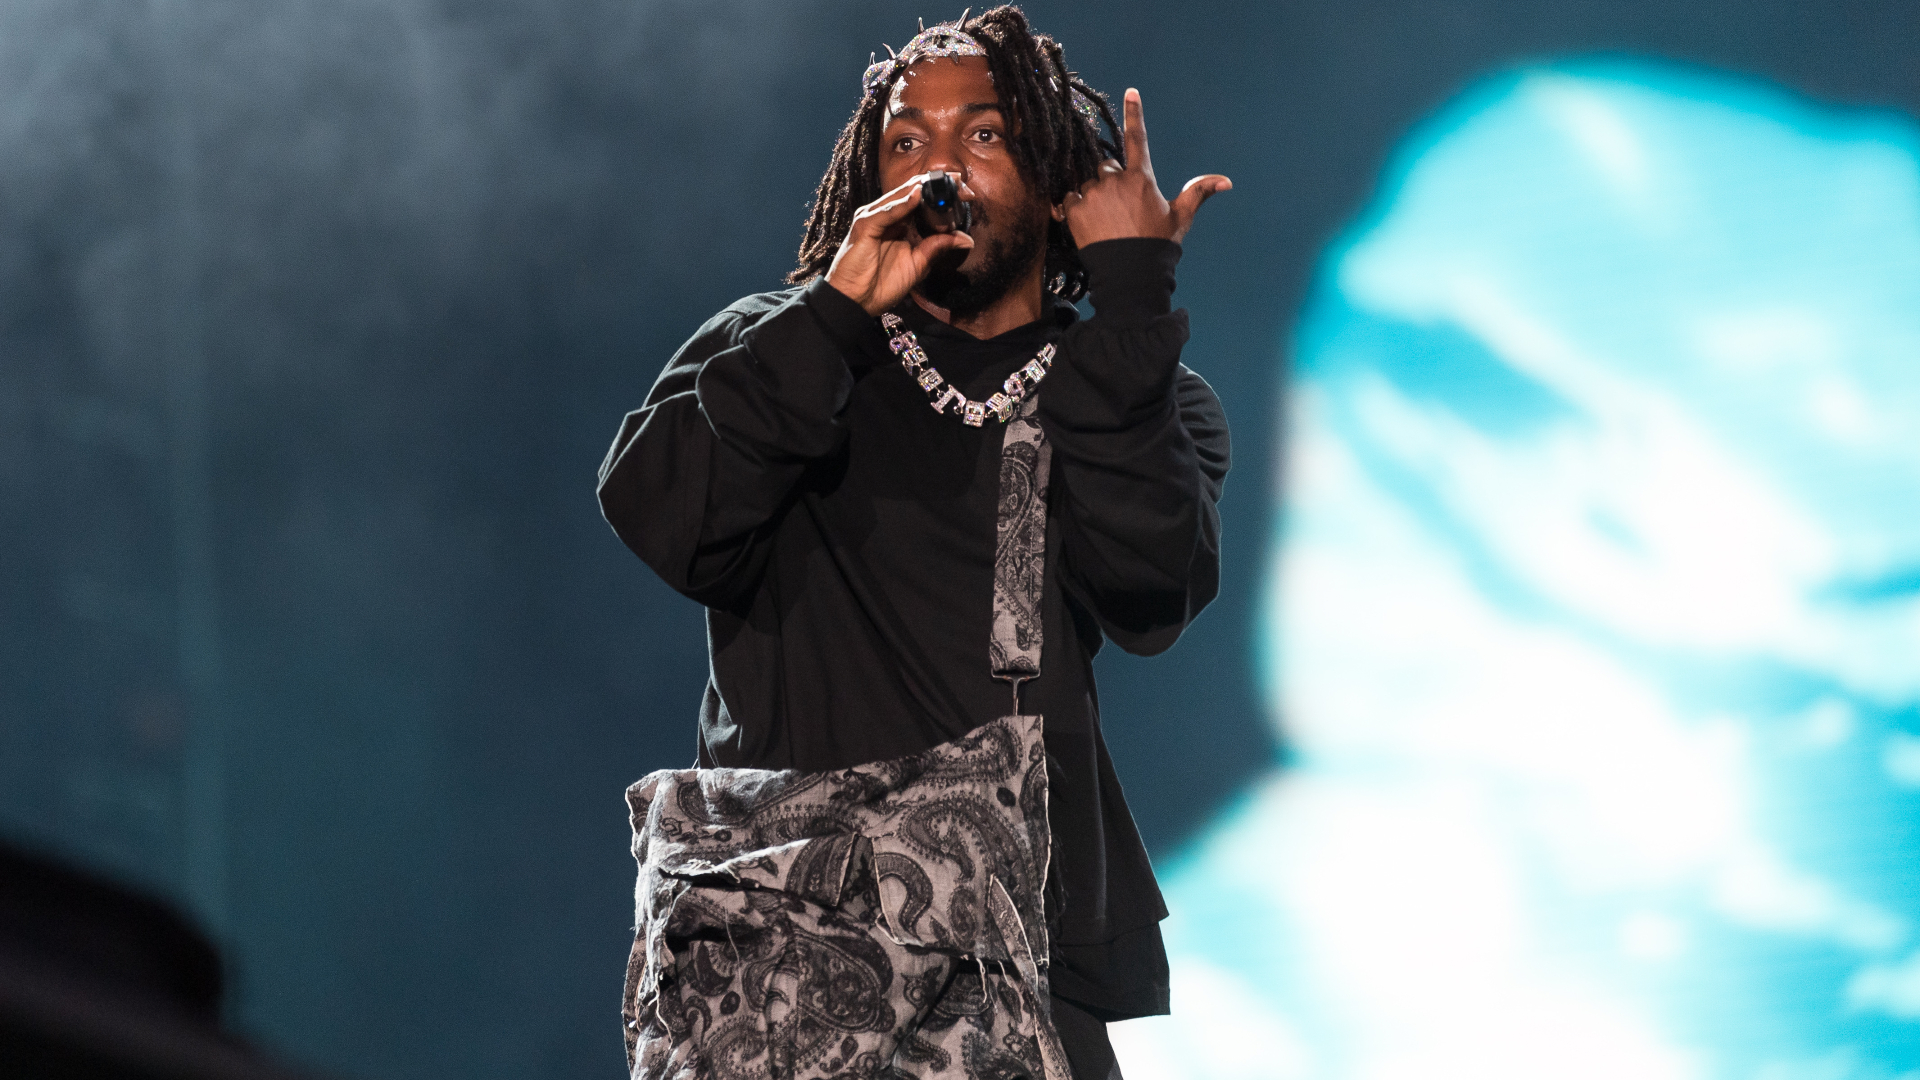 Kendrick Lamar joins stars trying to keep concerts special, Pop and rock